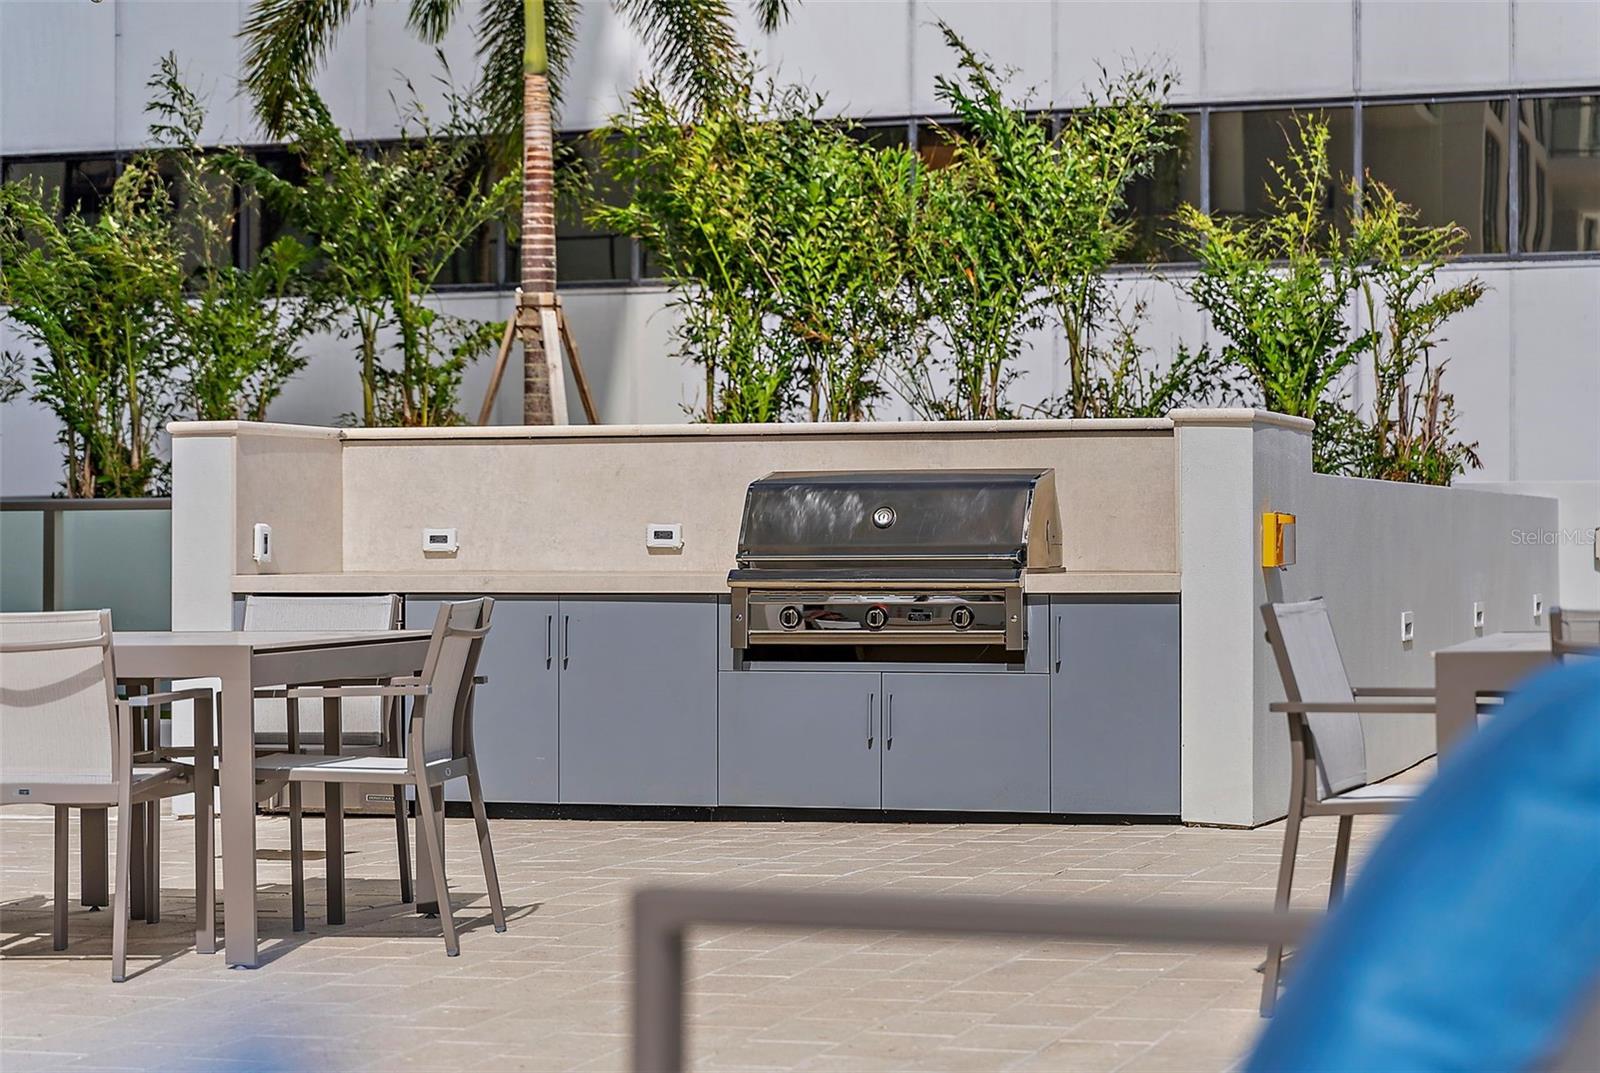 One (1) of three (3) outdoor grilling areas on the amenities deck - outrageous views of the Rowdies Soccer Stadium and Tampa Bay